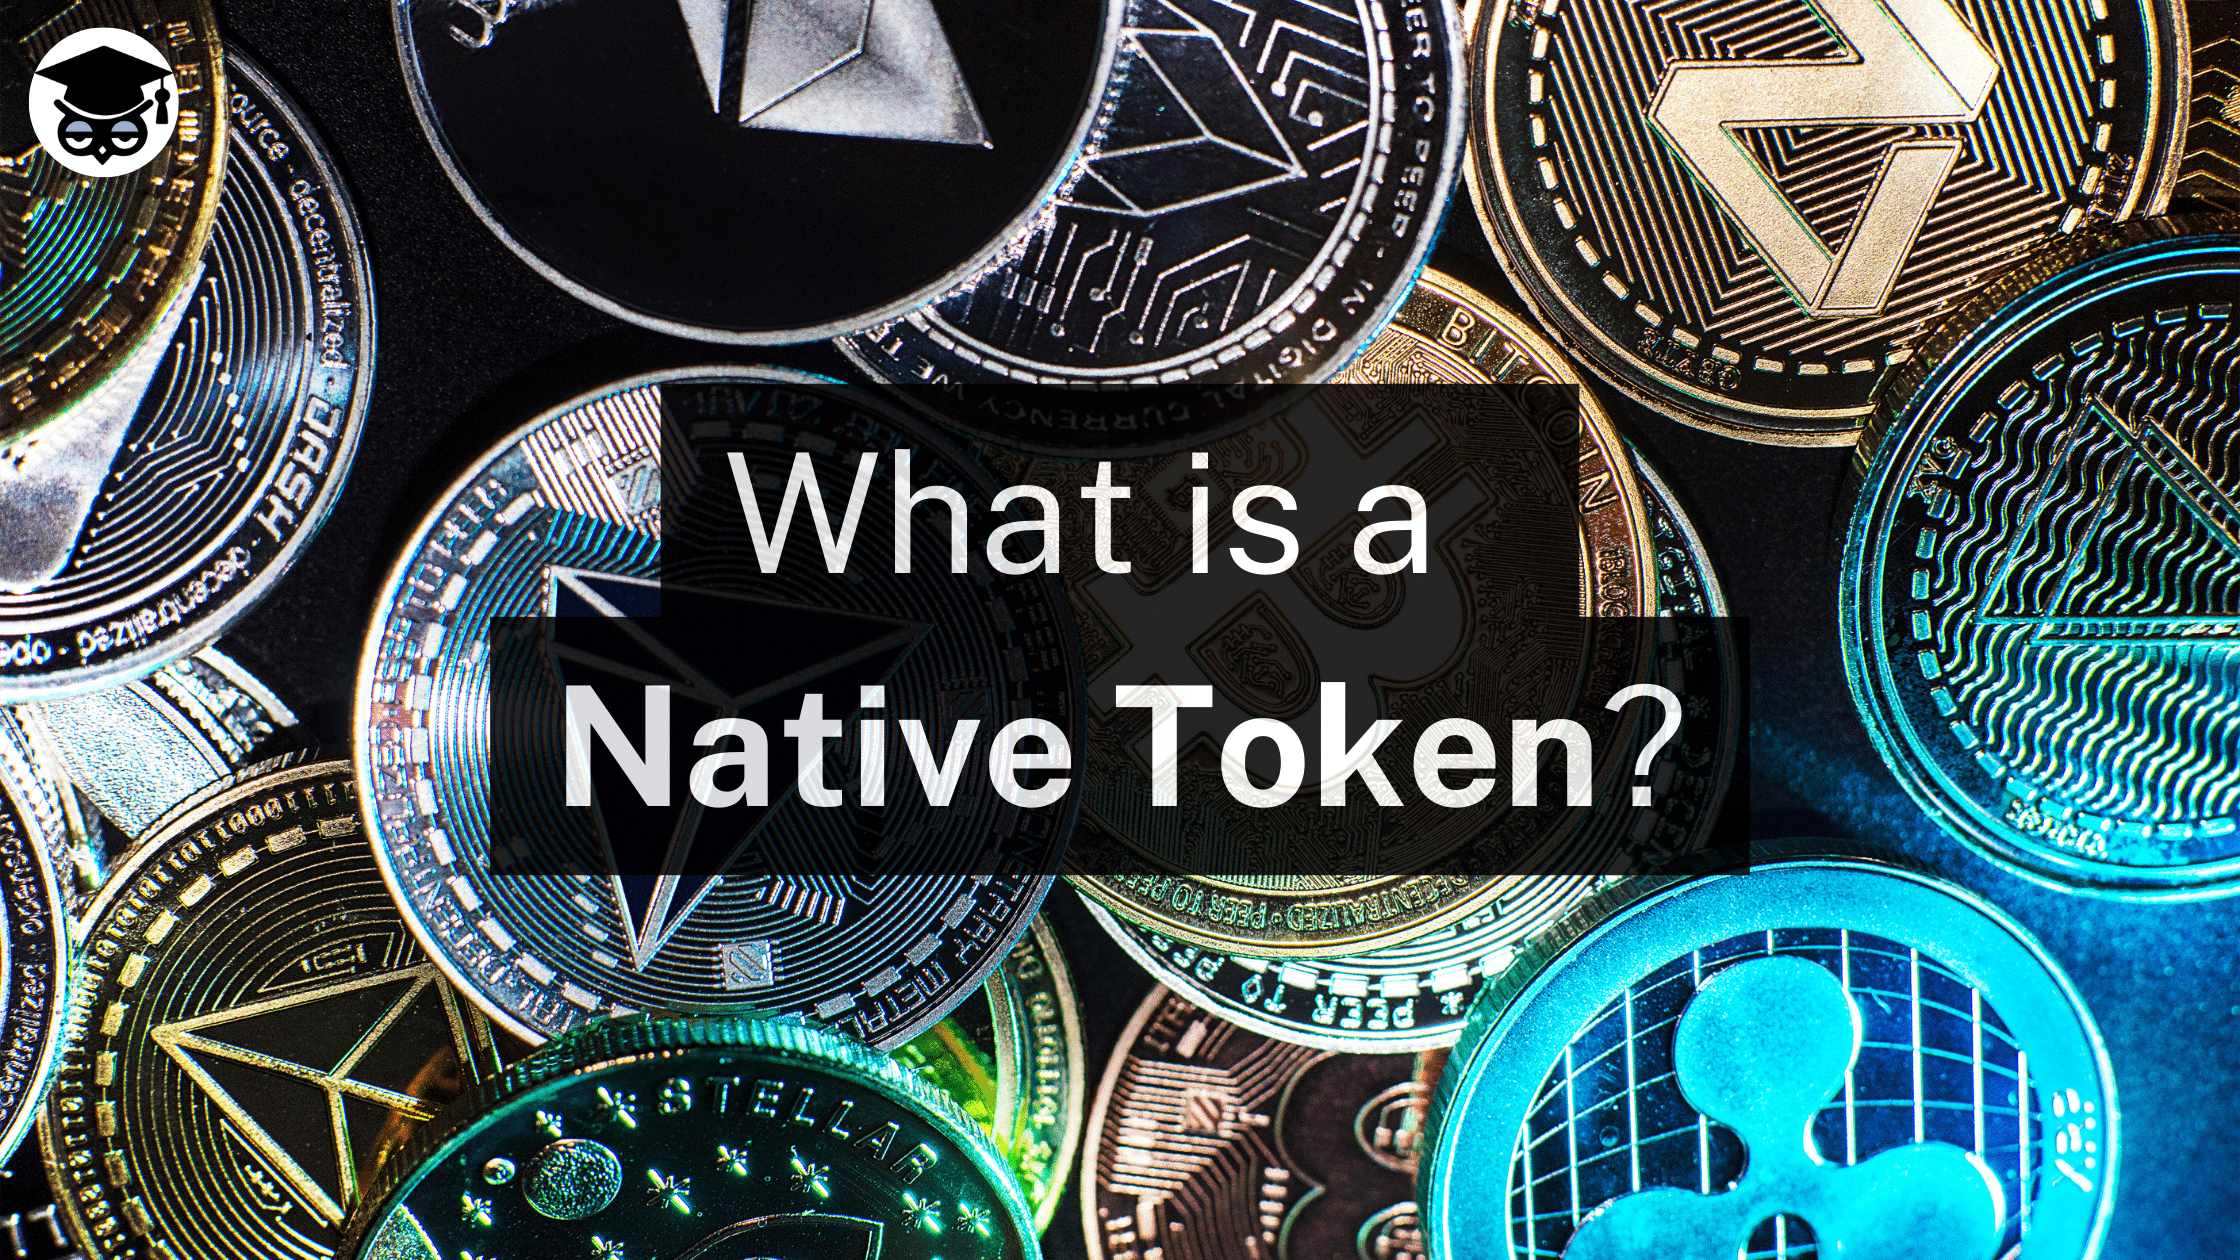 What is a native token